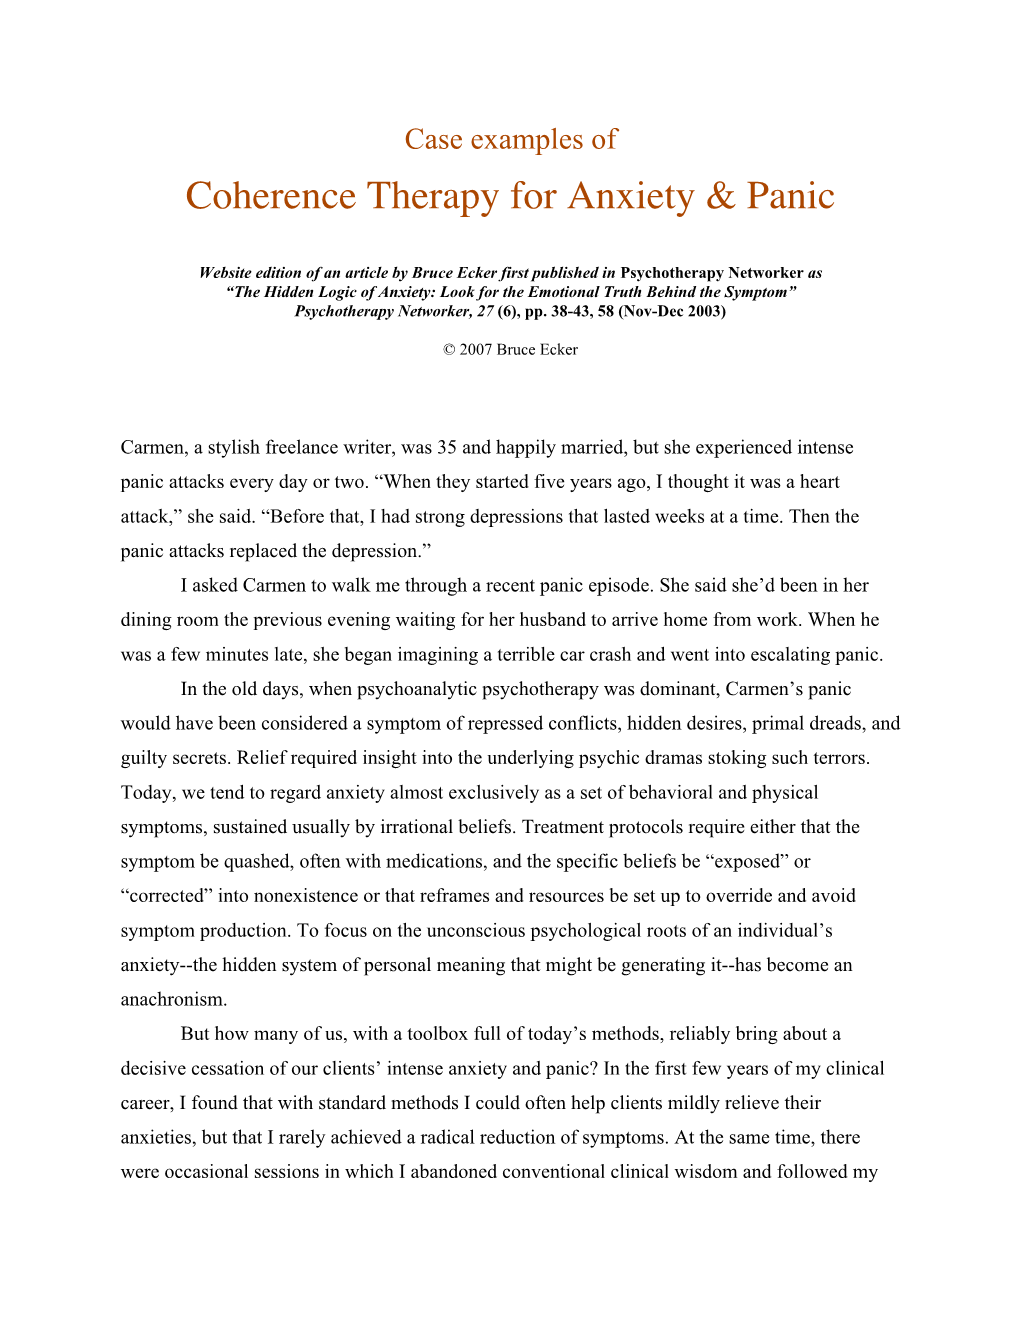 Coherence Therapy for Anxiety & Panic